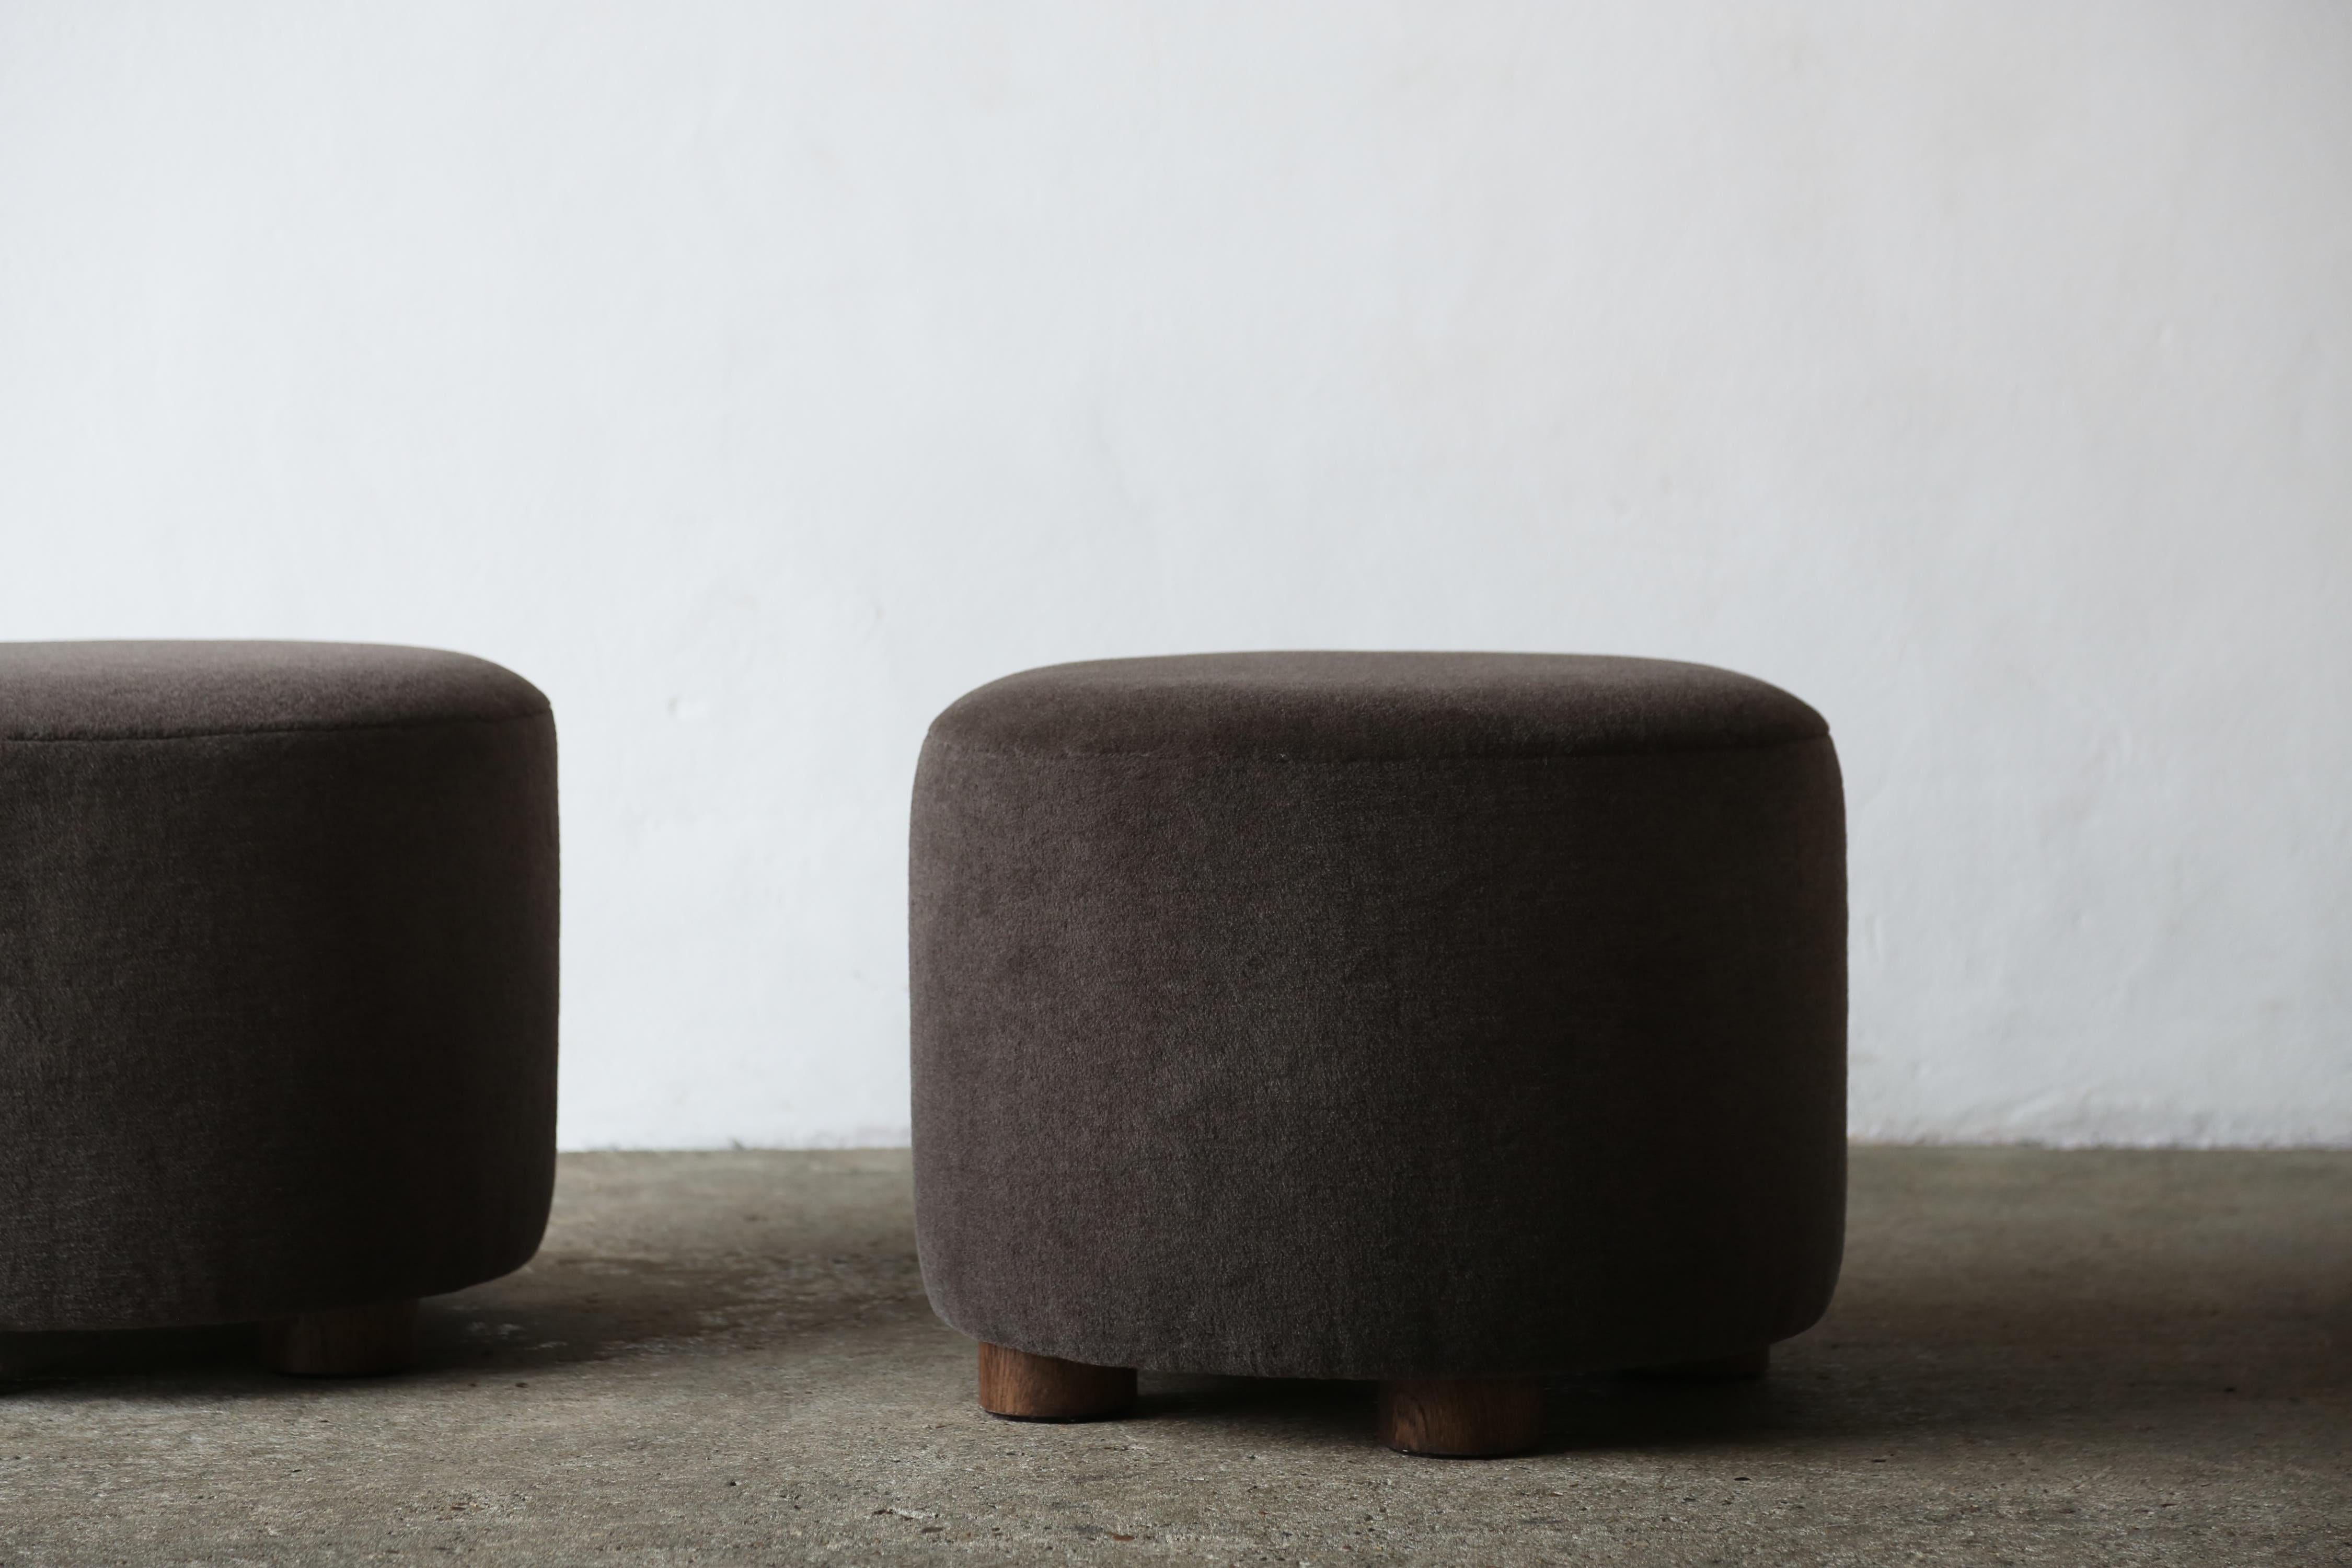 Pair of Low Round Ottomans / Footstools in Pure Dark Brown Alpaca In Good Condition For Sale In London, GB